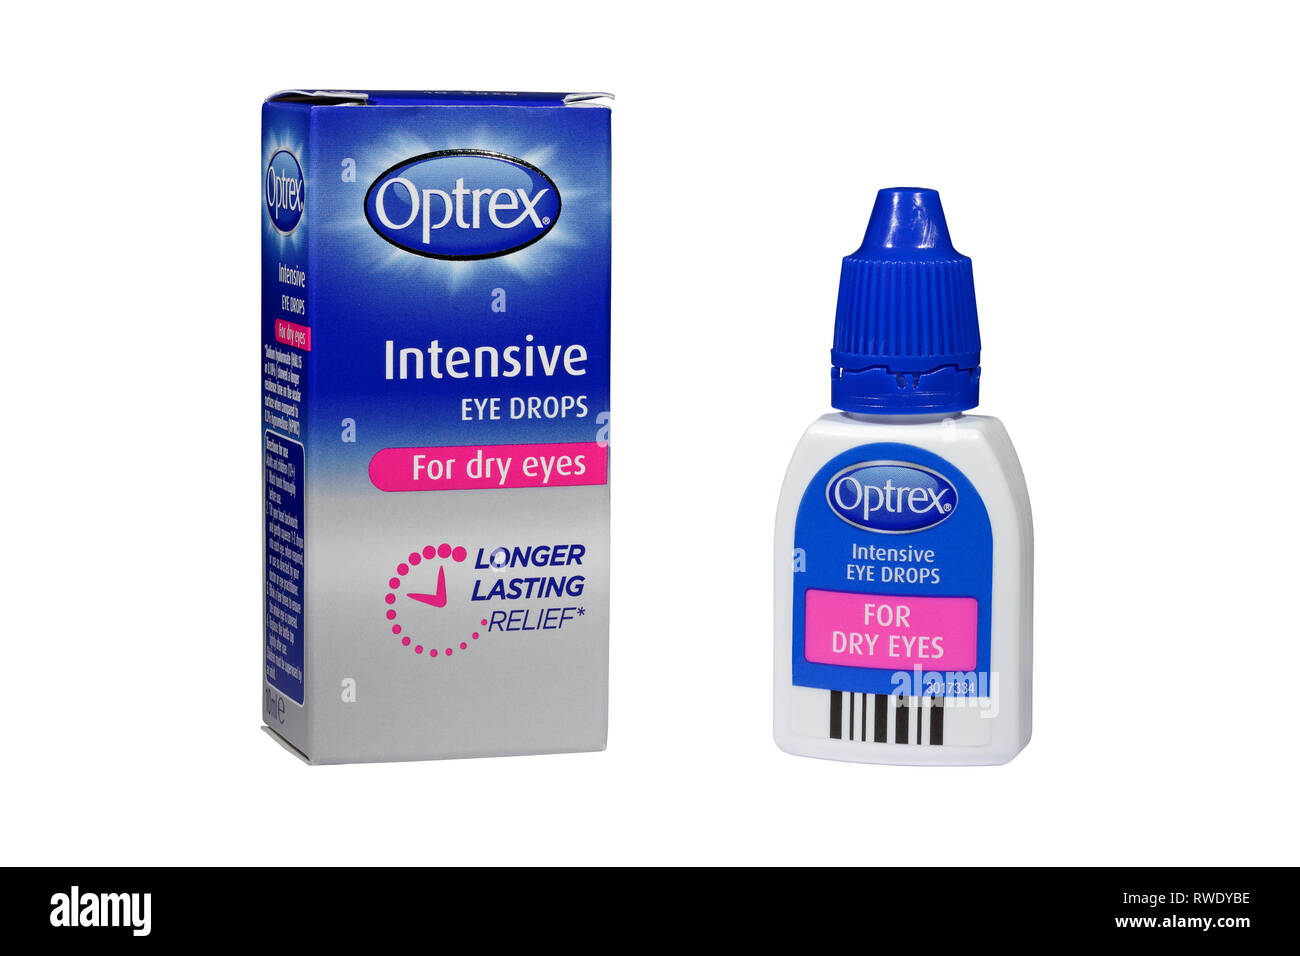 A 10ml box / bottle of Optrex Intensive Eye Drops for Dry Eyes isolated on a white background Stock Photo